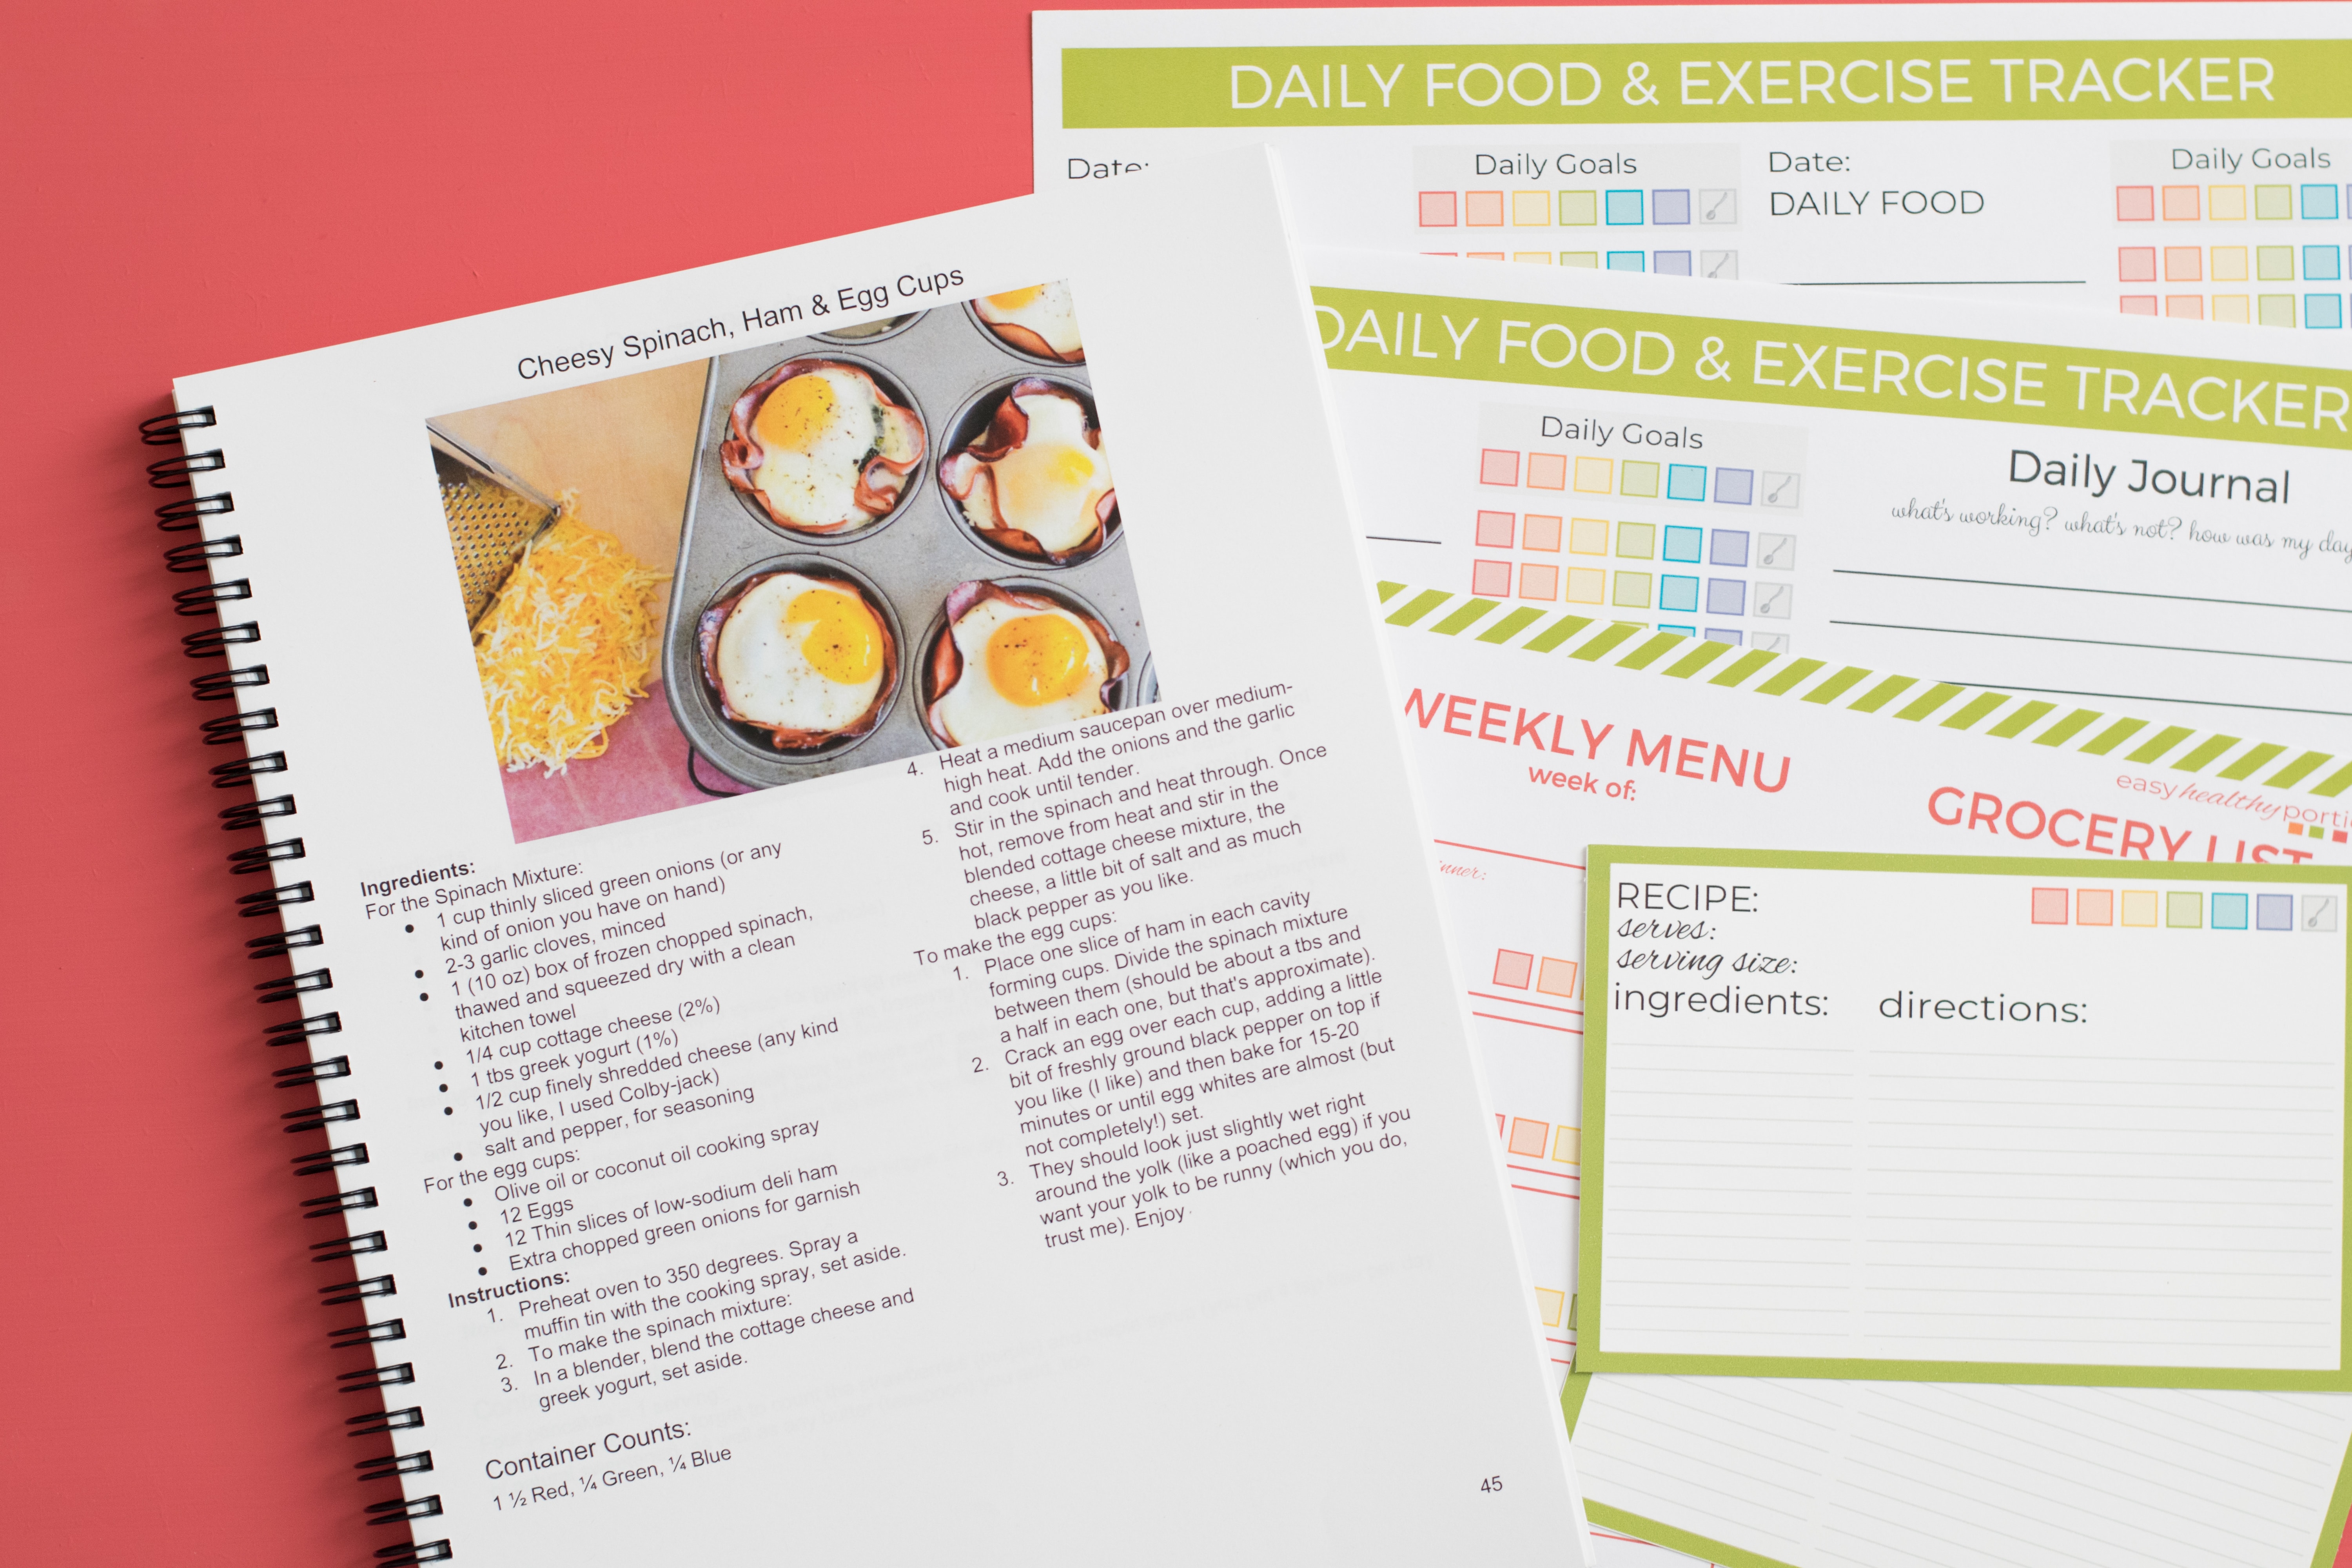 I'm bringing you The Ultimate Toolkit for success on the 21 Day Fix! It has tons of recipes, printables, meal planning tips, how to read a nutrition label, food lists, frequently asked questions and SO MUCH MORE! #21dayfix #mealplanning #healthy #healthyrecipes #healthycookbook #beachbody 